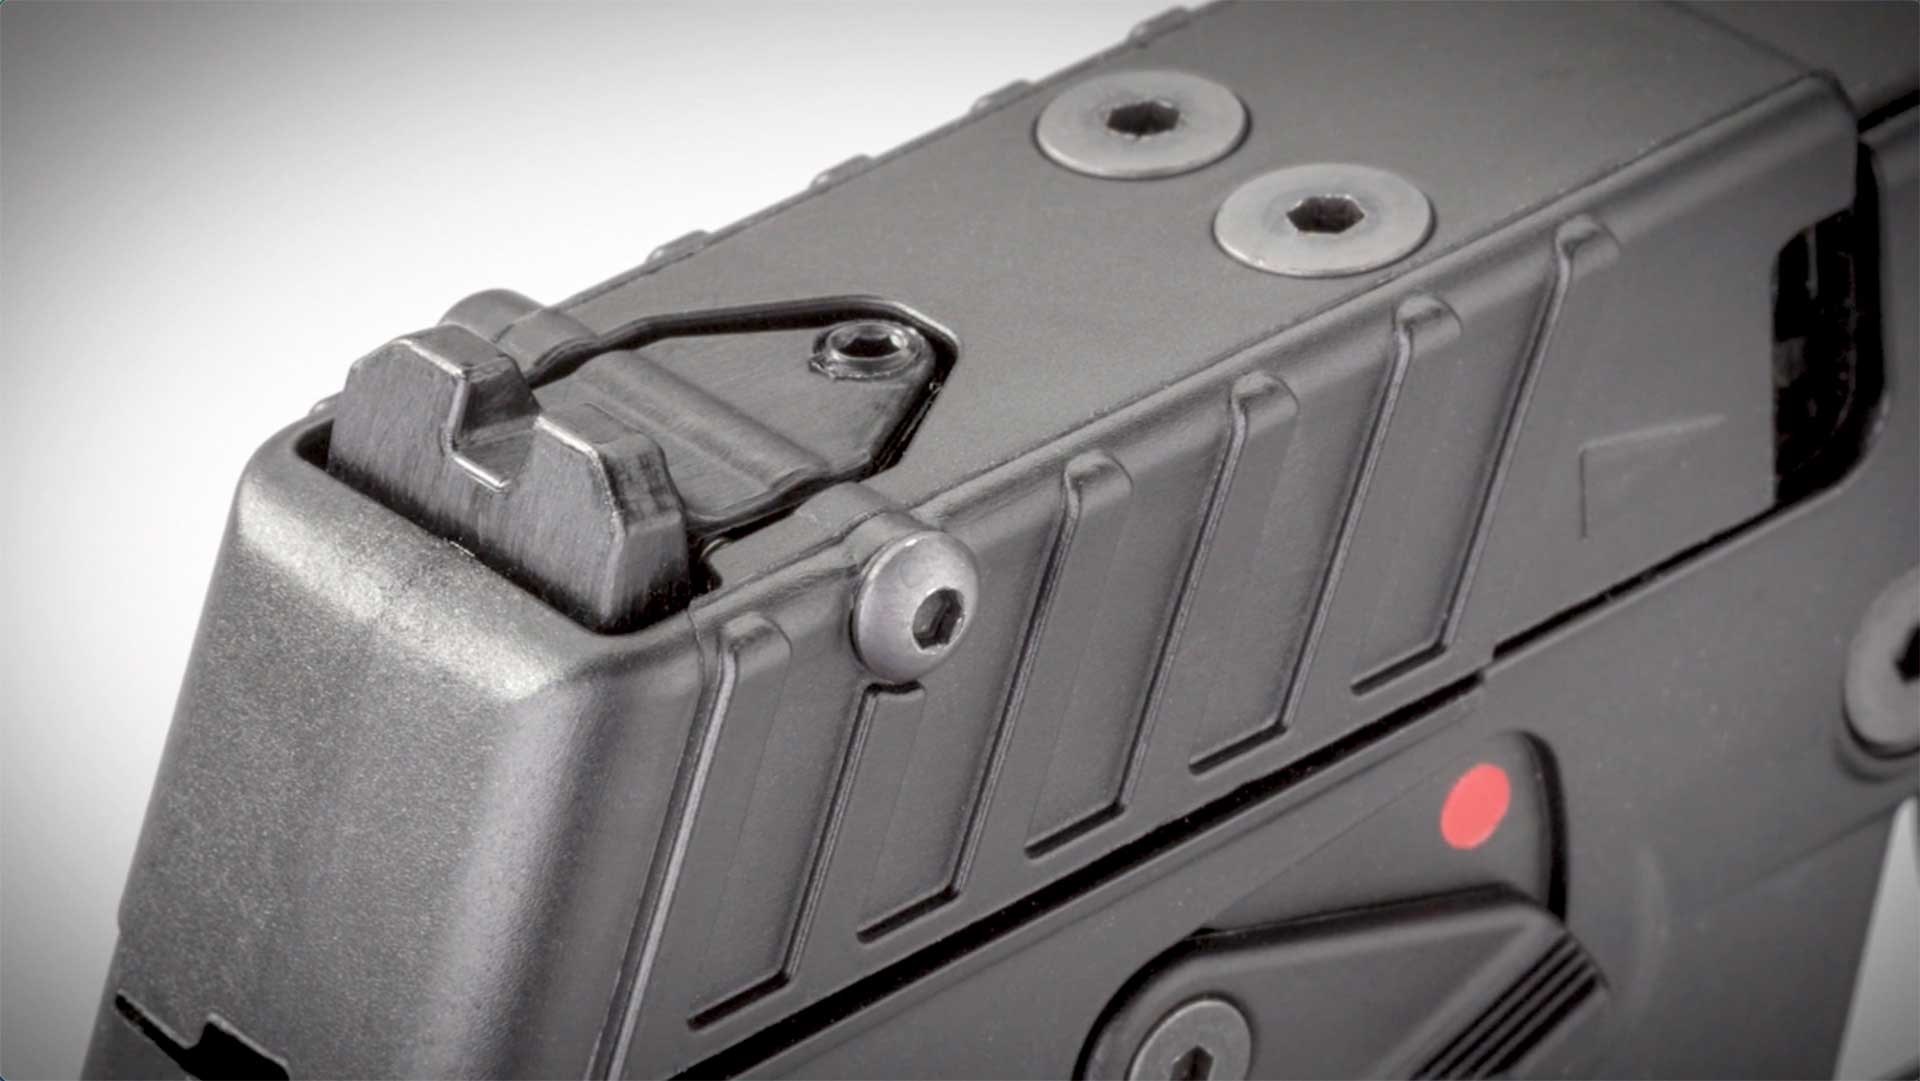 A close-up shot of the fully adjustable rear sight on the KelTec P17 pistol.